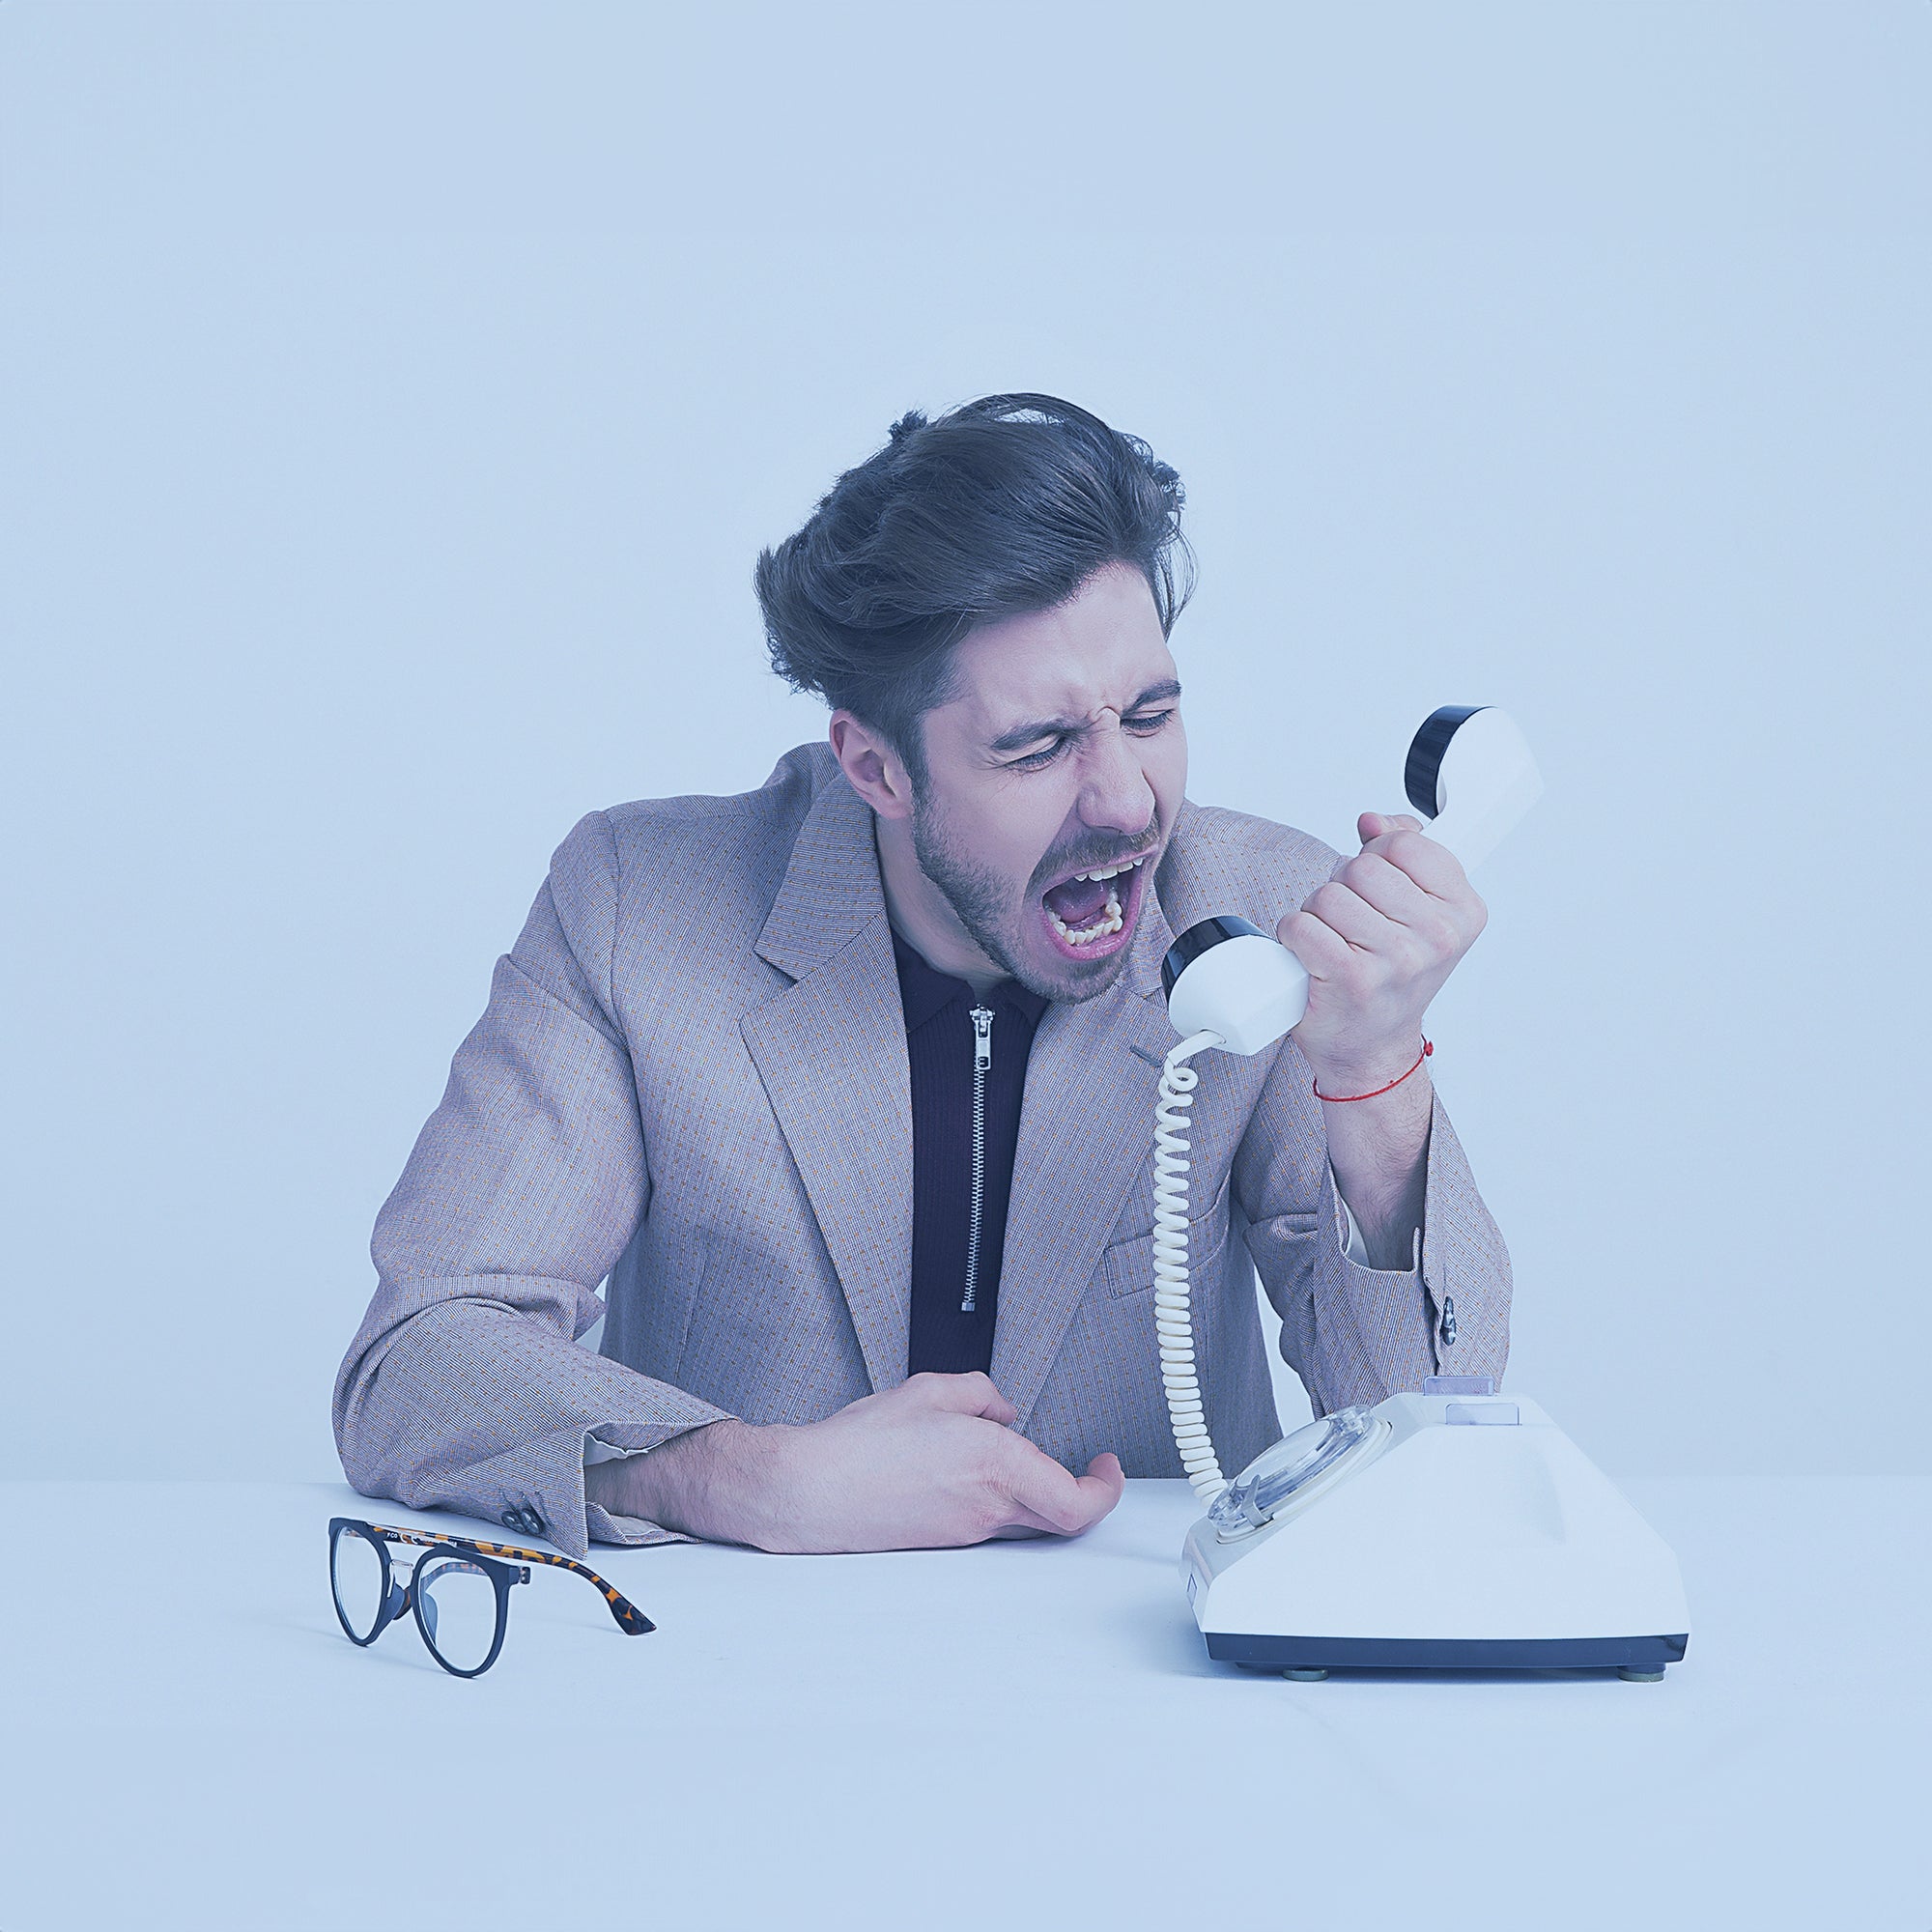 Man yelling into an old school telephone